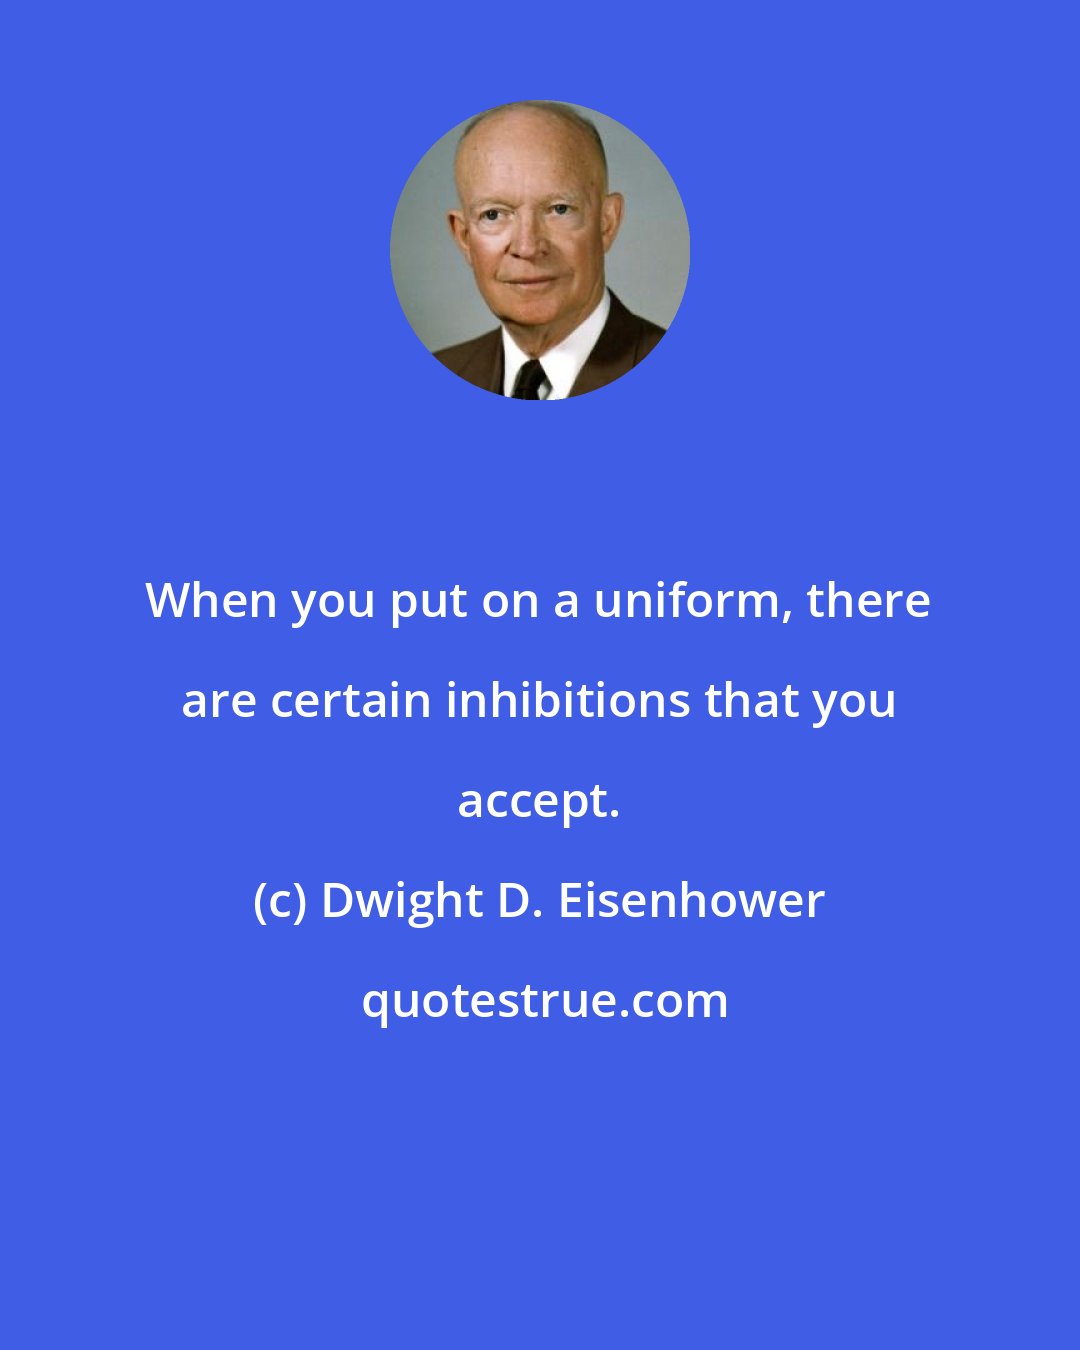 Dwight D. Eisenhower: When you put on a uniform, there are certain inhibitions that you accept.